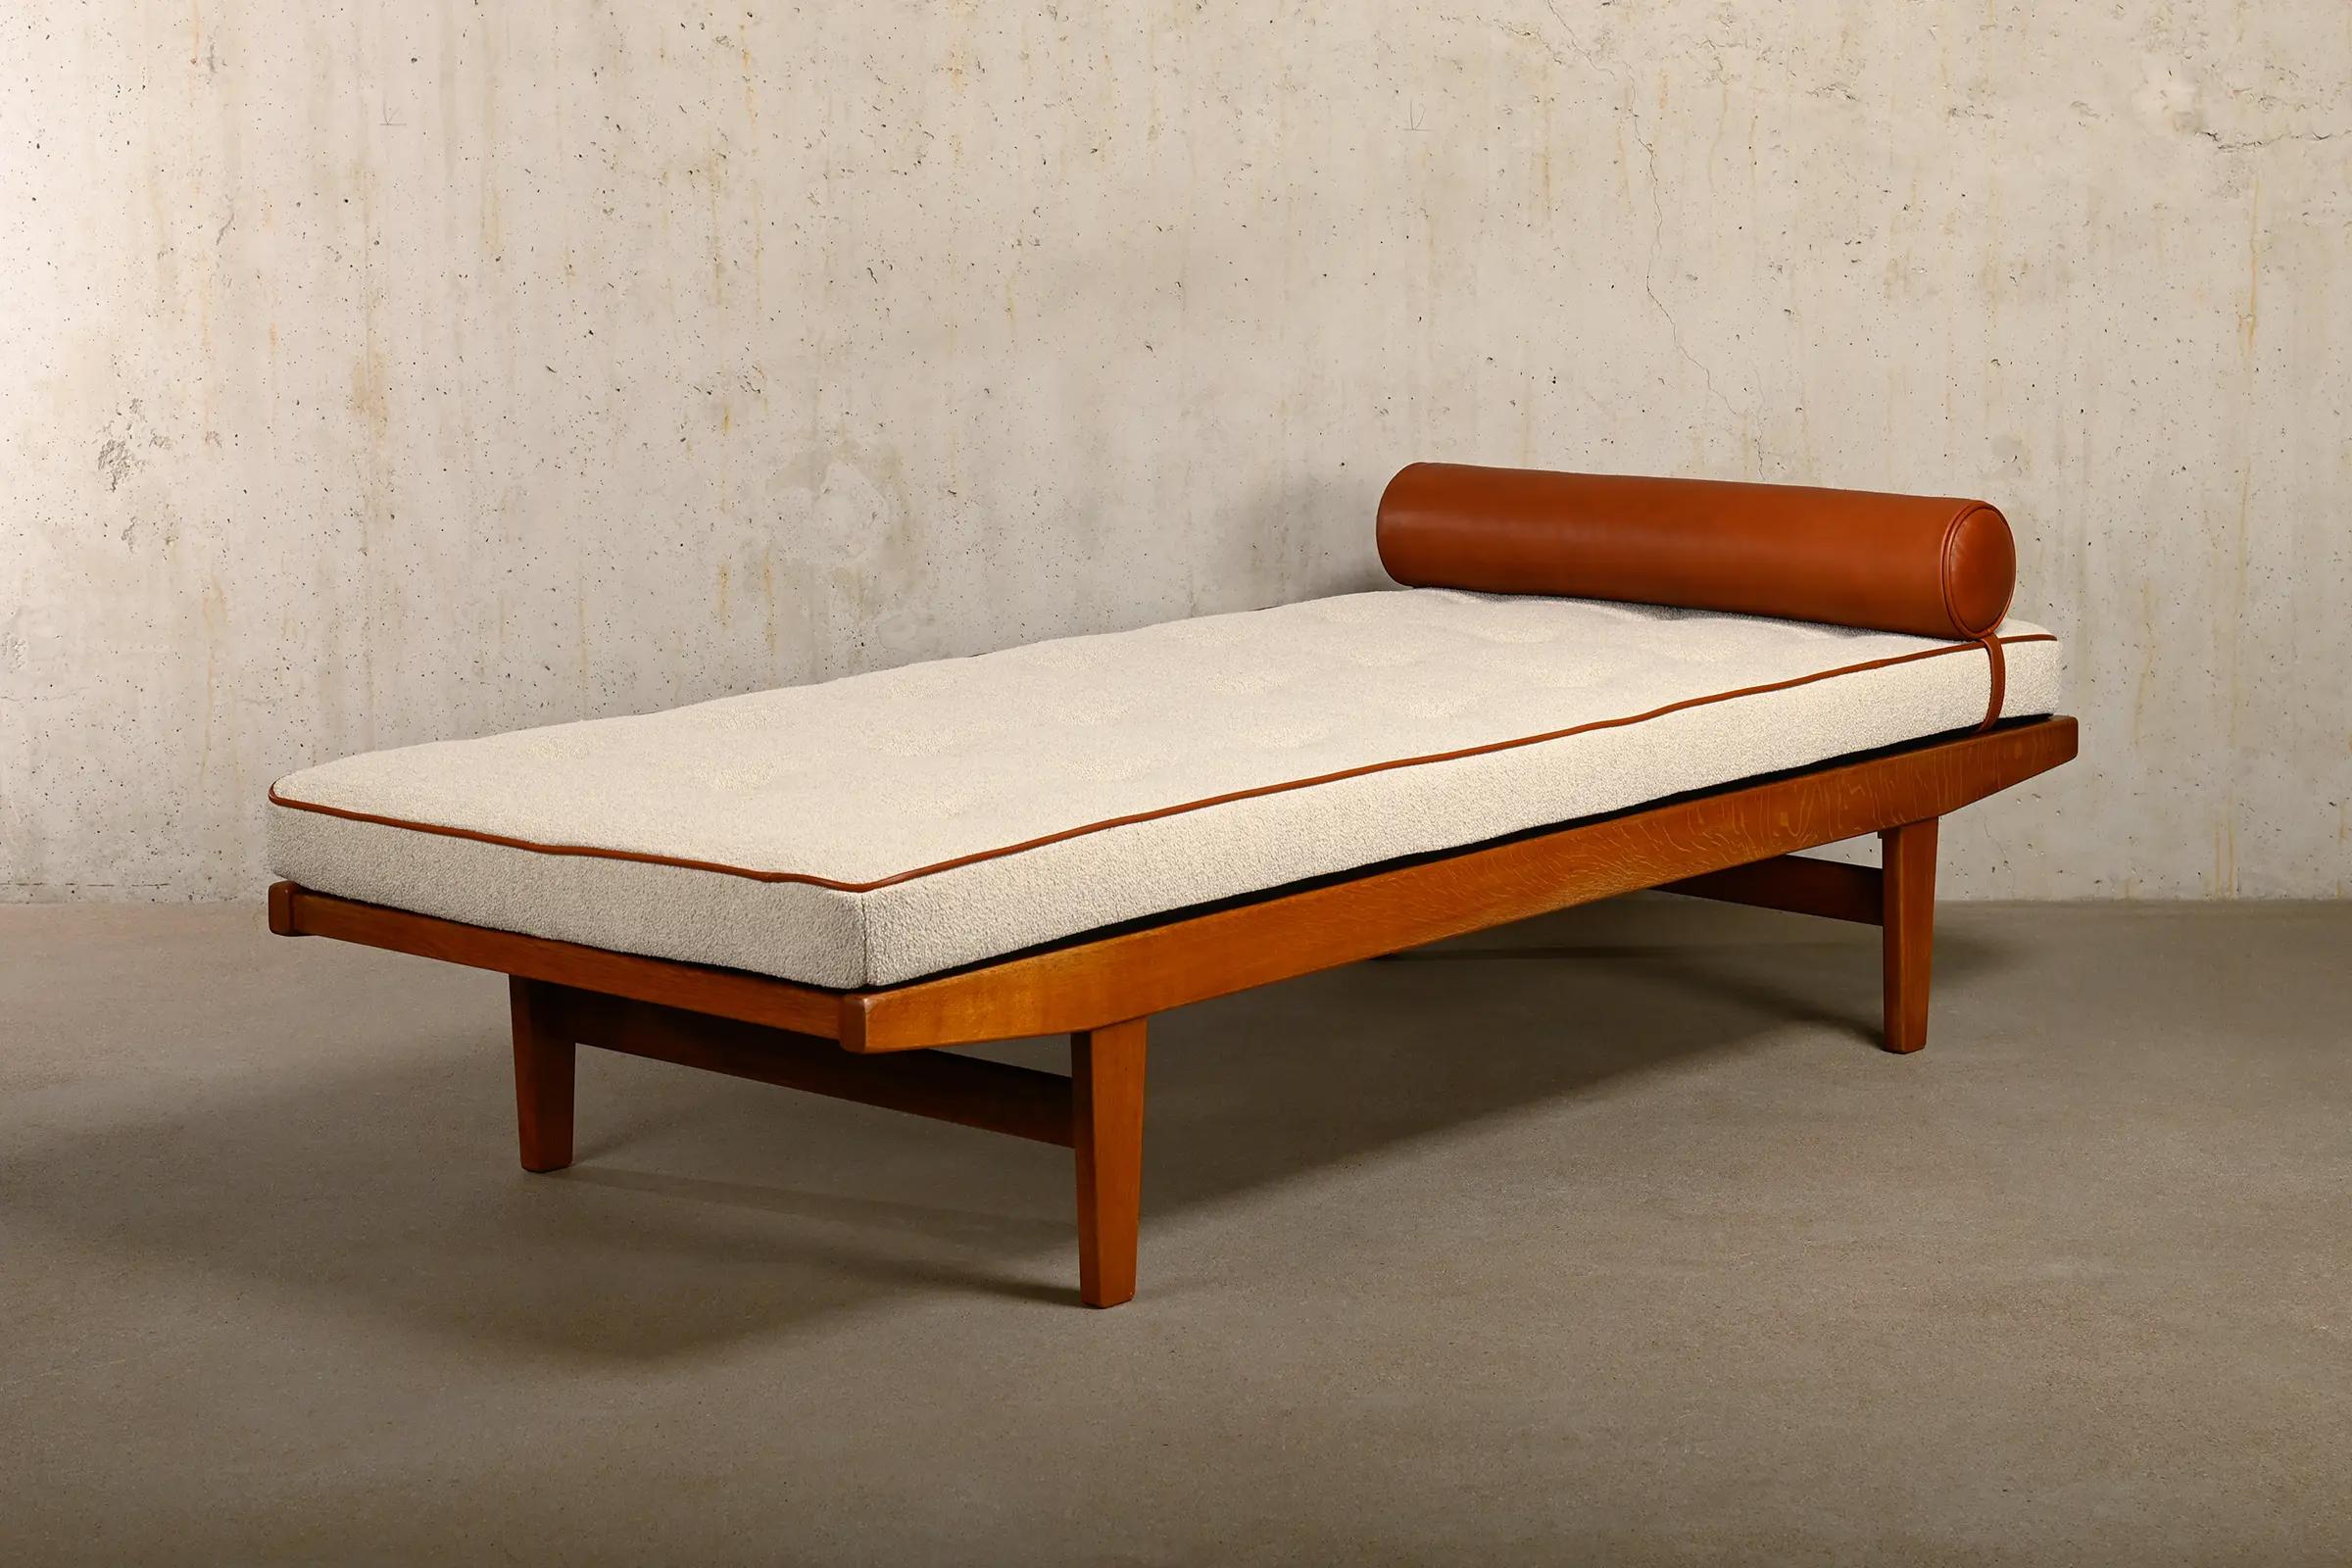 Elegant Daybed designed by Poul M. Volther for FDB Møbler, Denmark 1960s. Solid Oak frame with warm woodgrain and wooden slatted base. The Daybed is in very good condition with minor signs of wear and signed with manufacturer stamp. The Oak frame